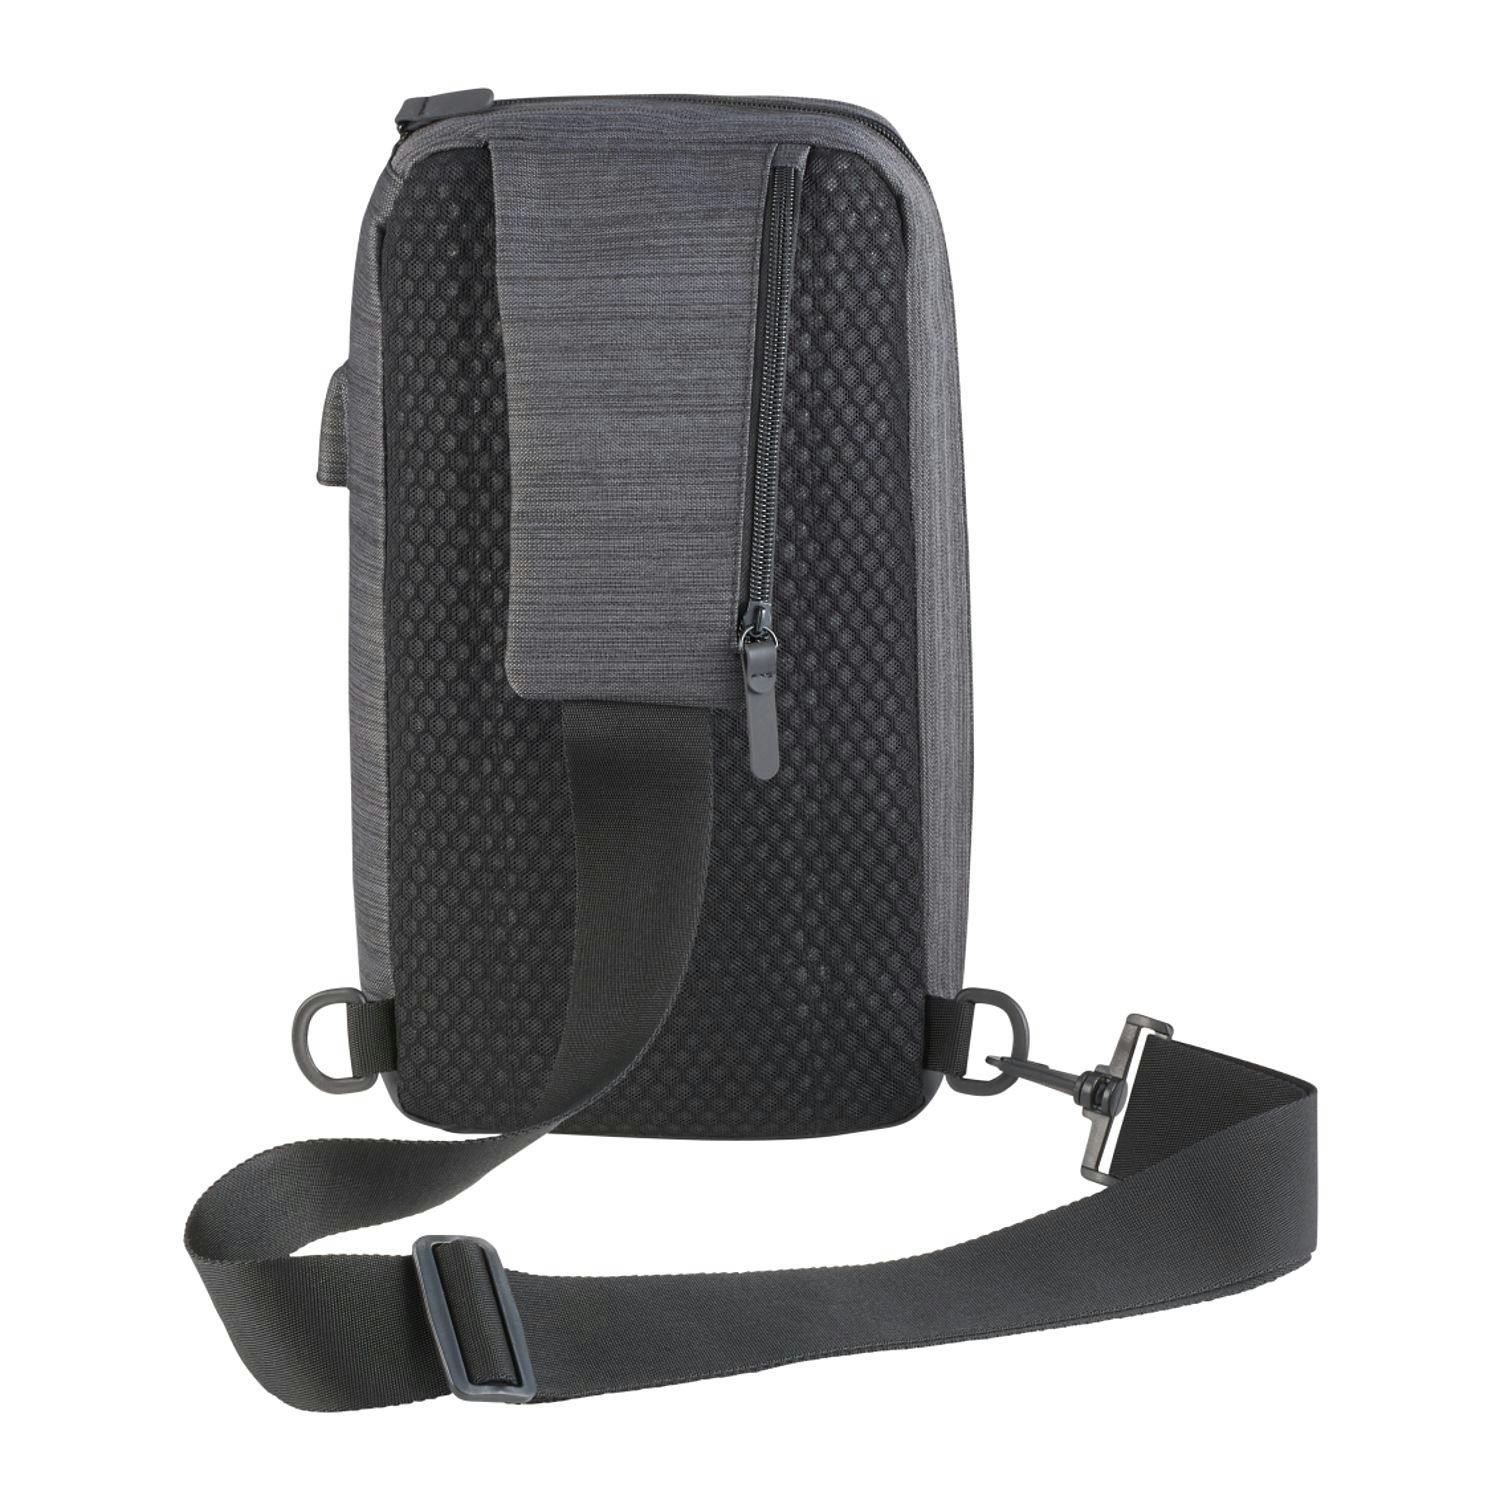 NBN Whitby Sling w/ USB Port - additional Image 4